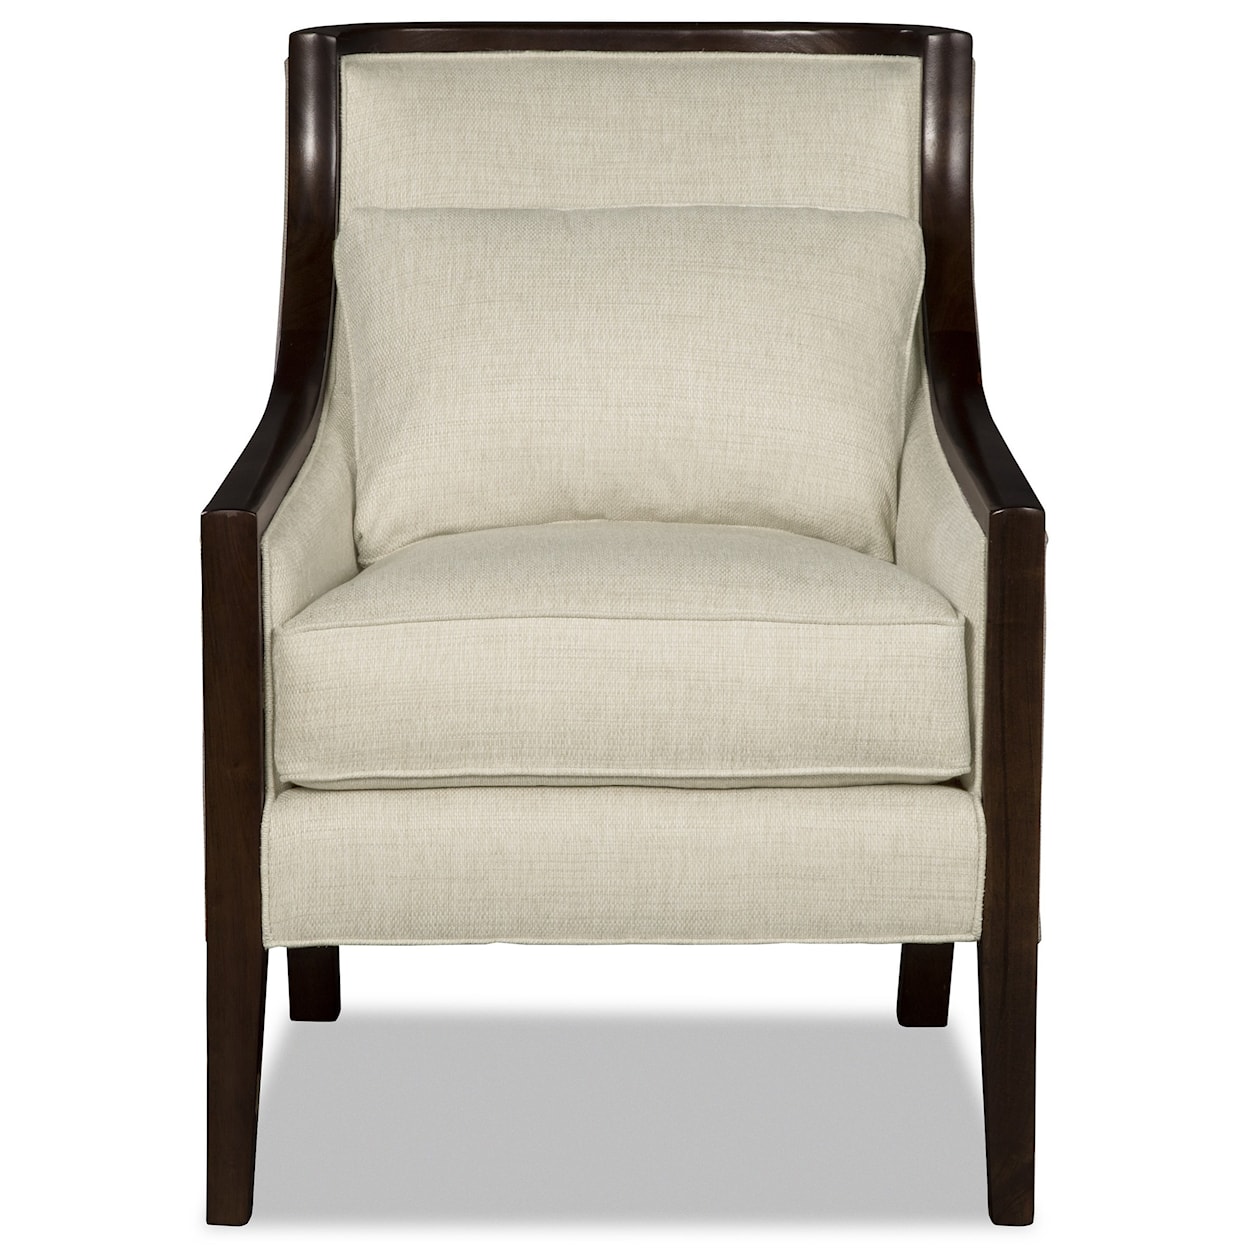 Craftmaster 001810 Wood Accent Chair